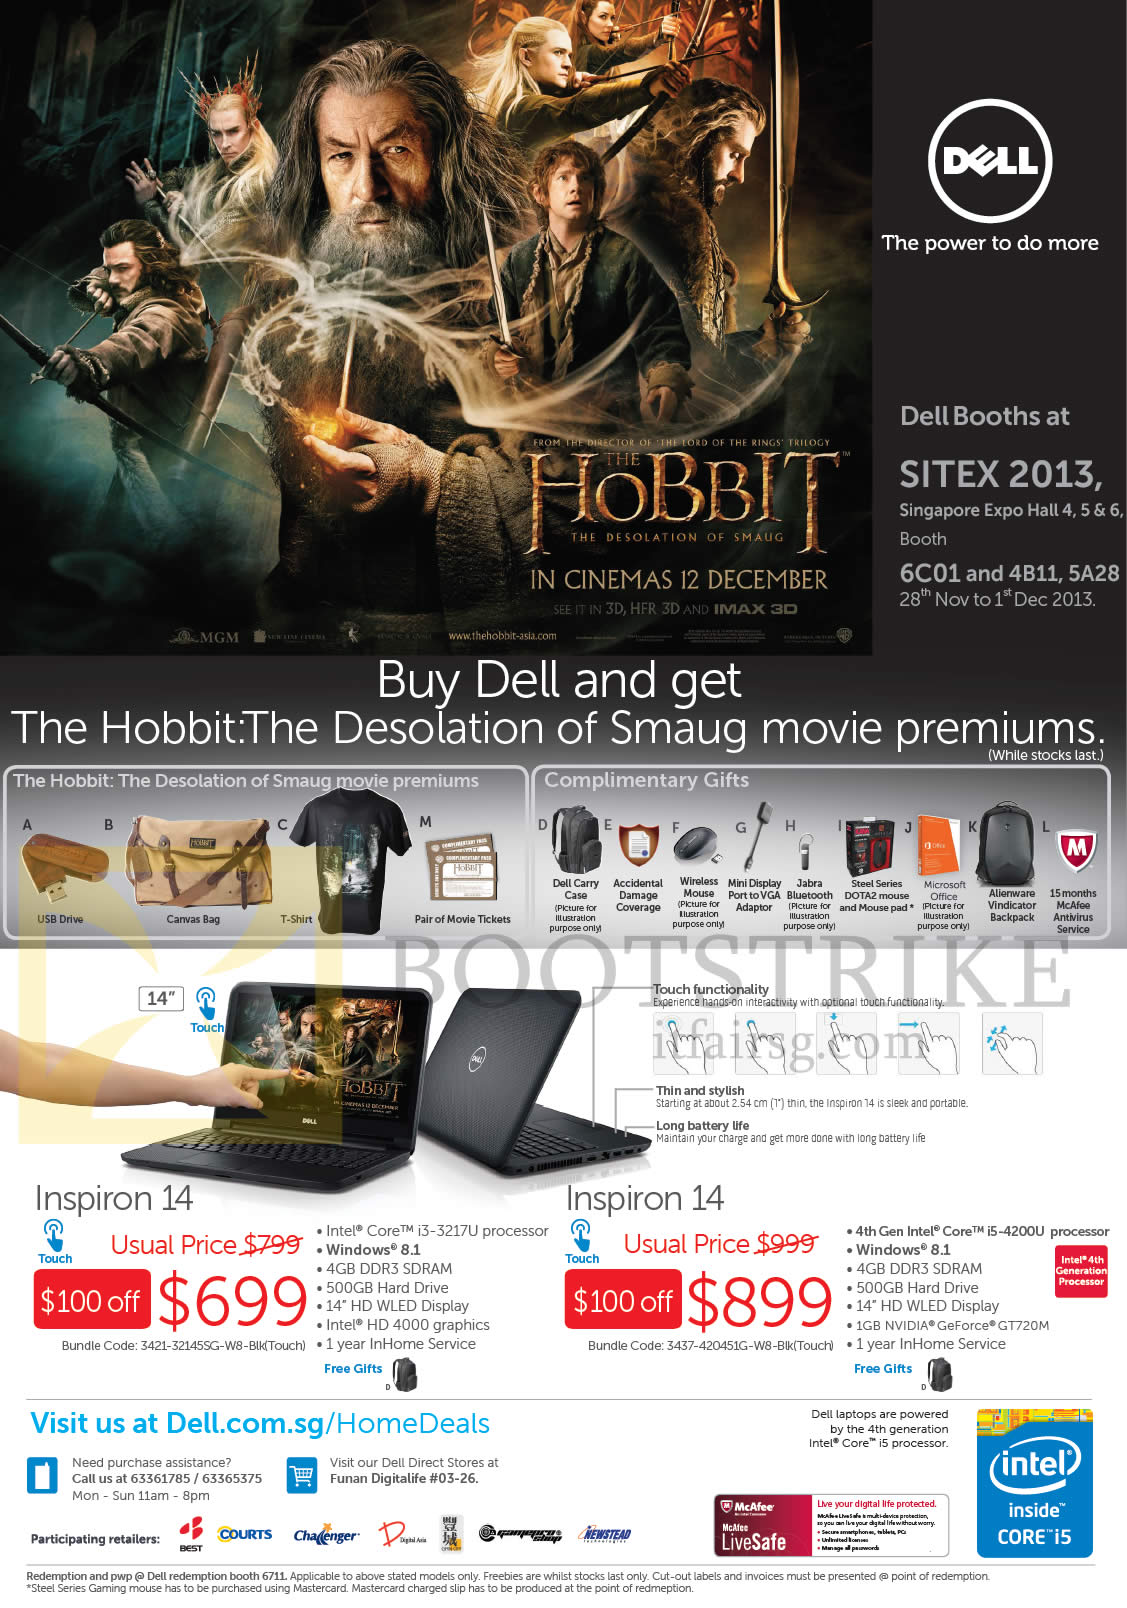 SITEX 2013 price list image brochure of Dell Notebooks Inspiron 14, Hobbit Movie Premiums, Gifts